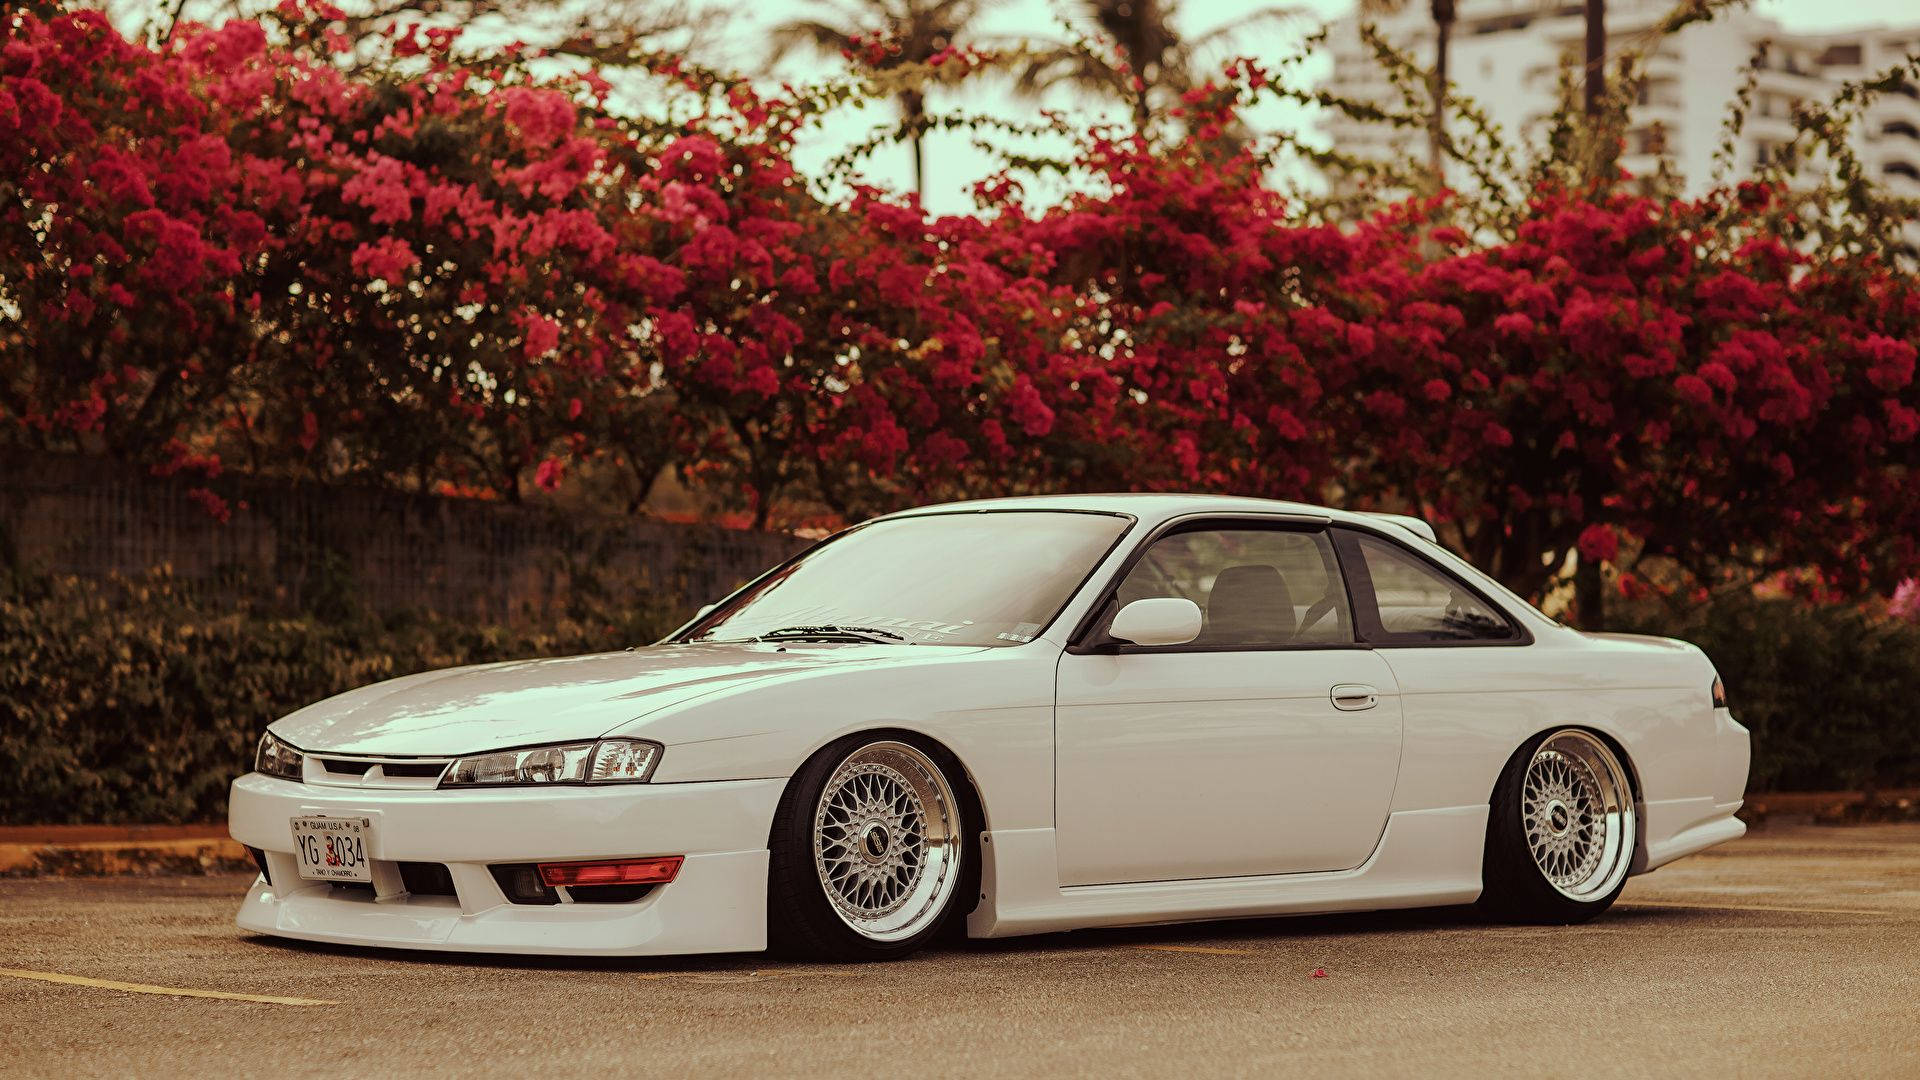 Experience raw power with the Nissan Silvia S14 Wallpaper